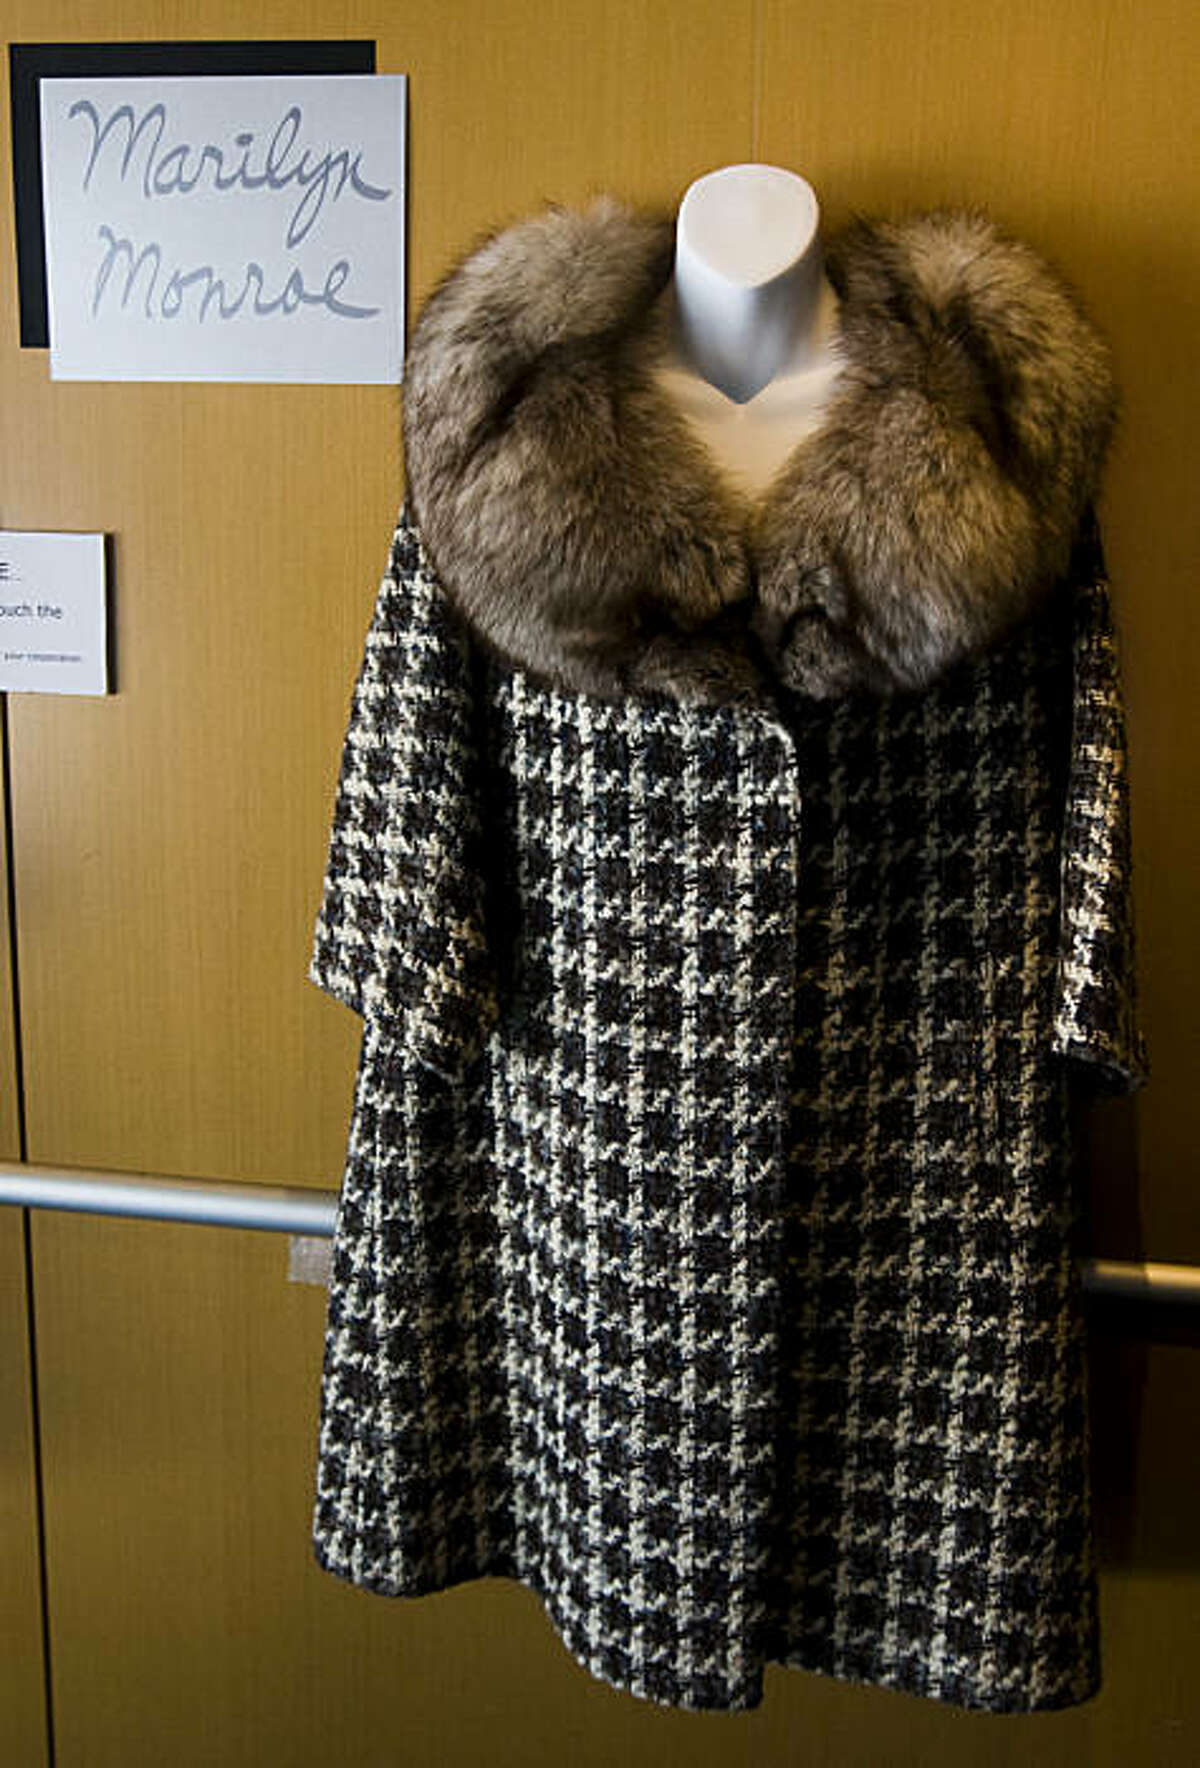 A coat worn by Marilyn Monroe hangs on display in the Metreon. Memorabilia from TV and movie stars is on display on the ground floor of the Metreon in San Francisco. The items are part of the "Hollywood Legends: The Barry Barsamian Collection" exhibit and will be on display until the end of May.